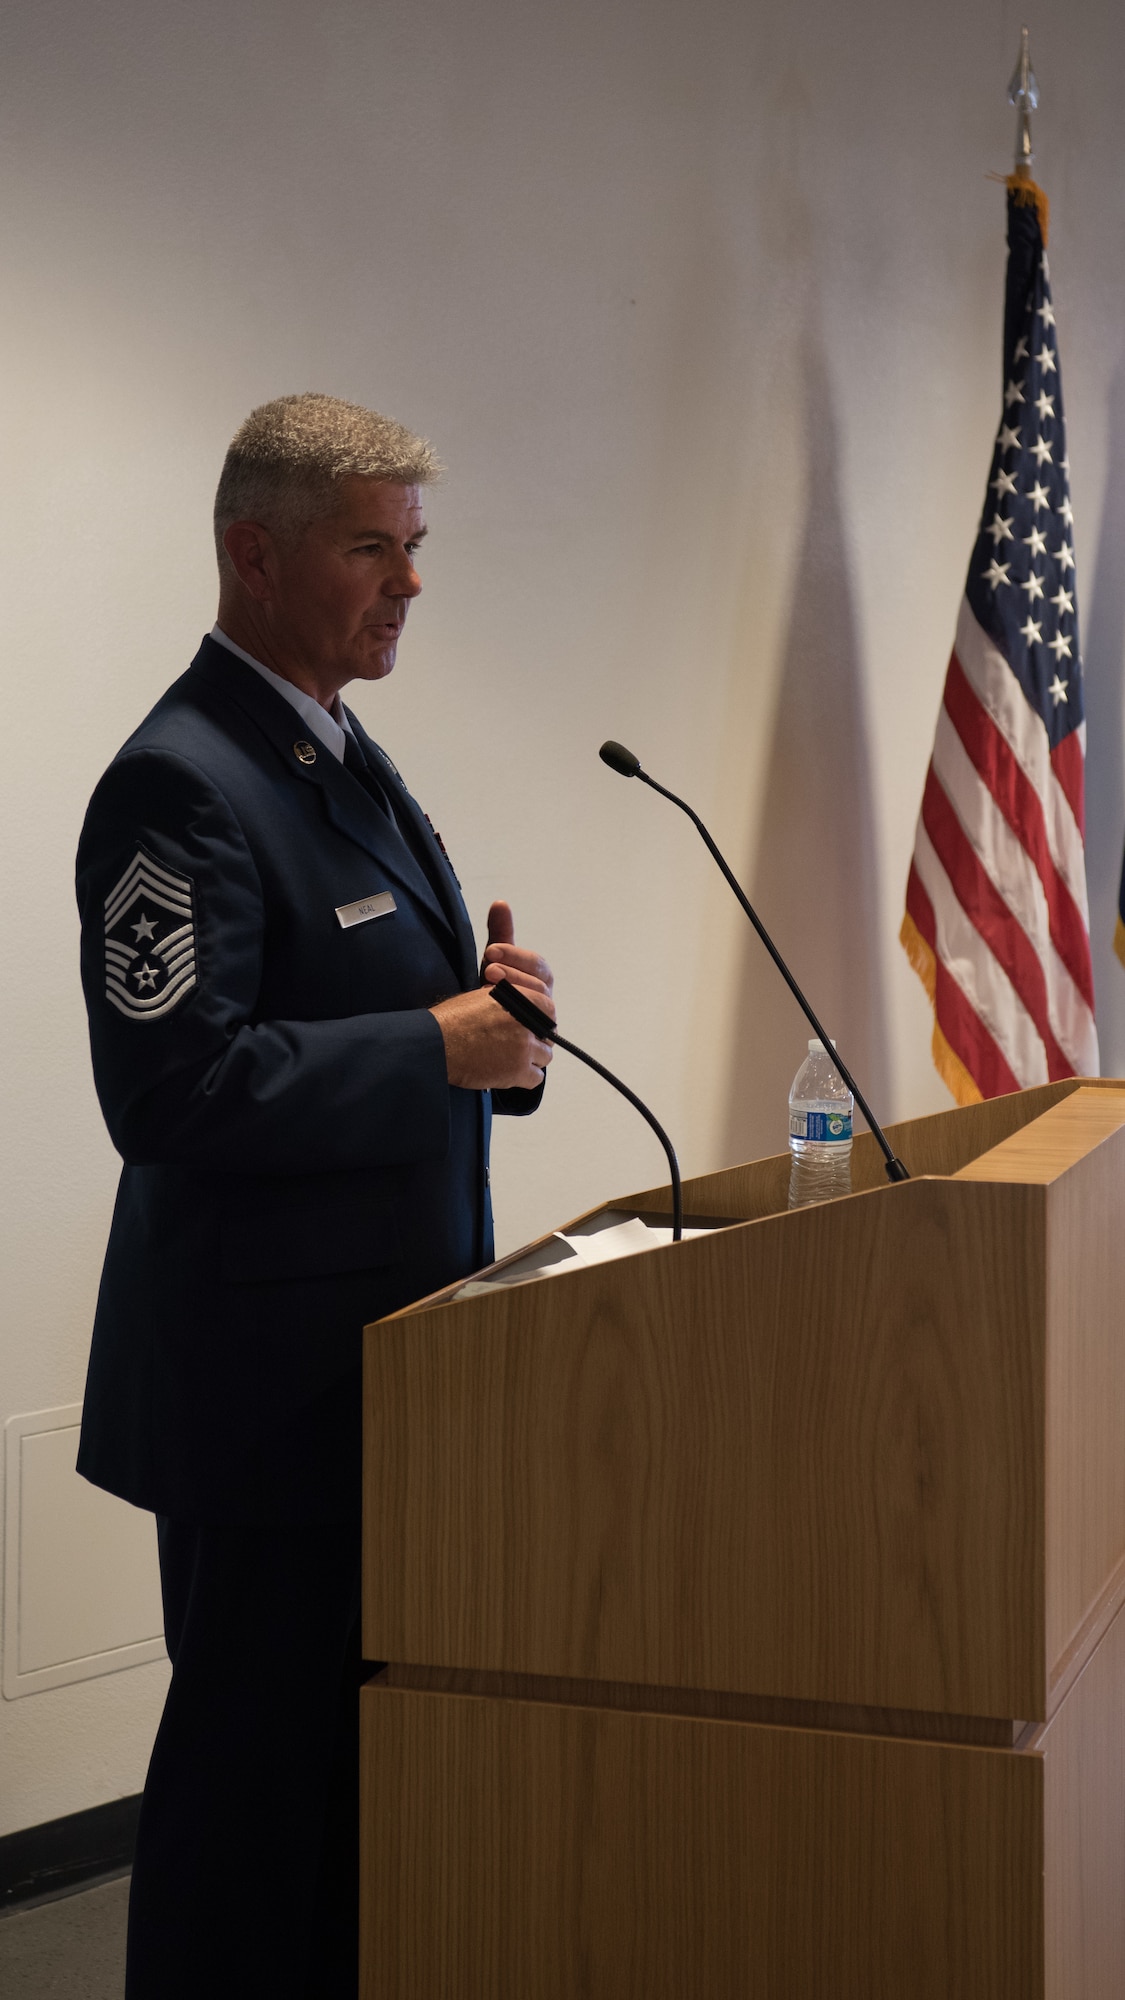 Chief Master Sgt. Charles H. Neal speaks during the Assumption of Authority ceremony at the 162nd Wing, Feb. 11, 2018. (U.S. Air National Guard photo by Senior Airman David English)